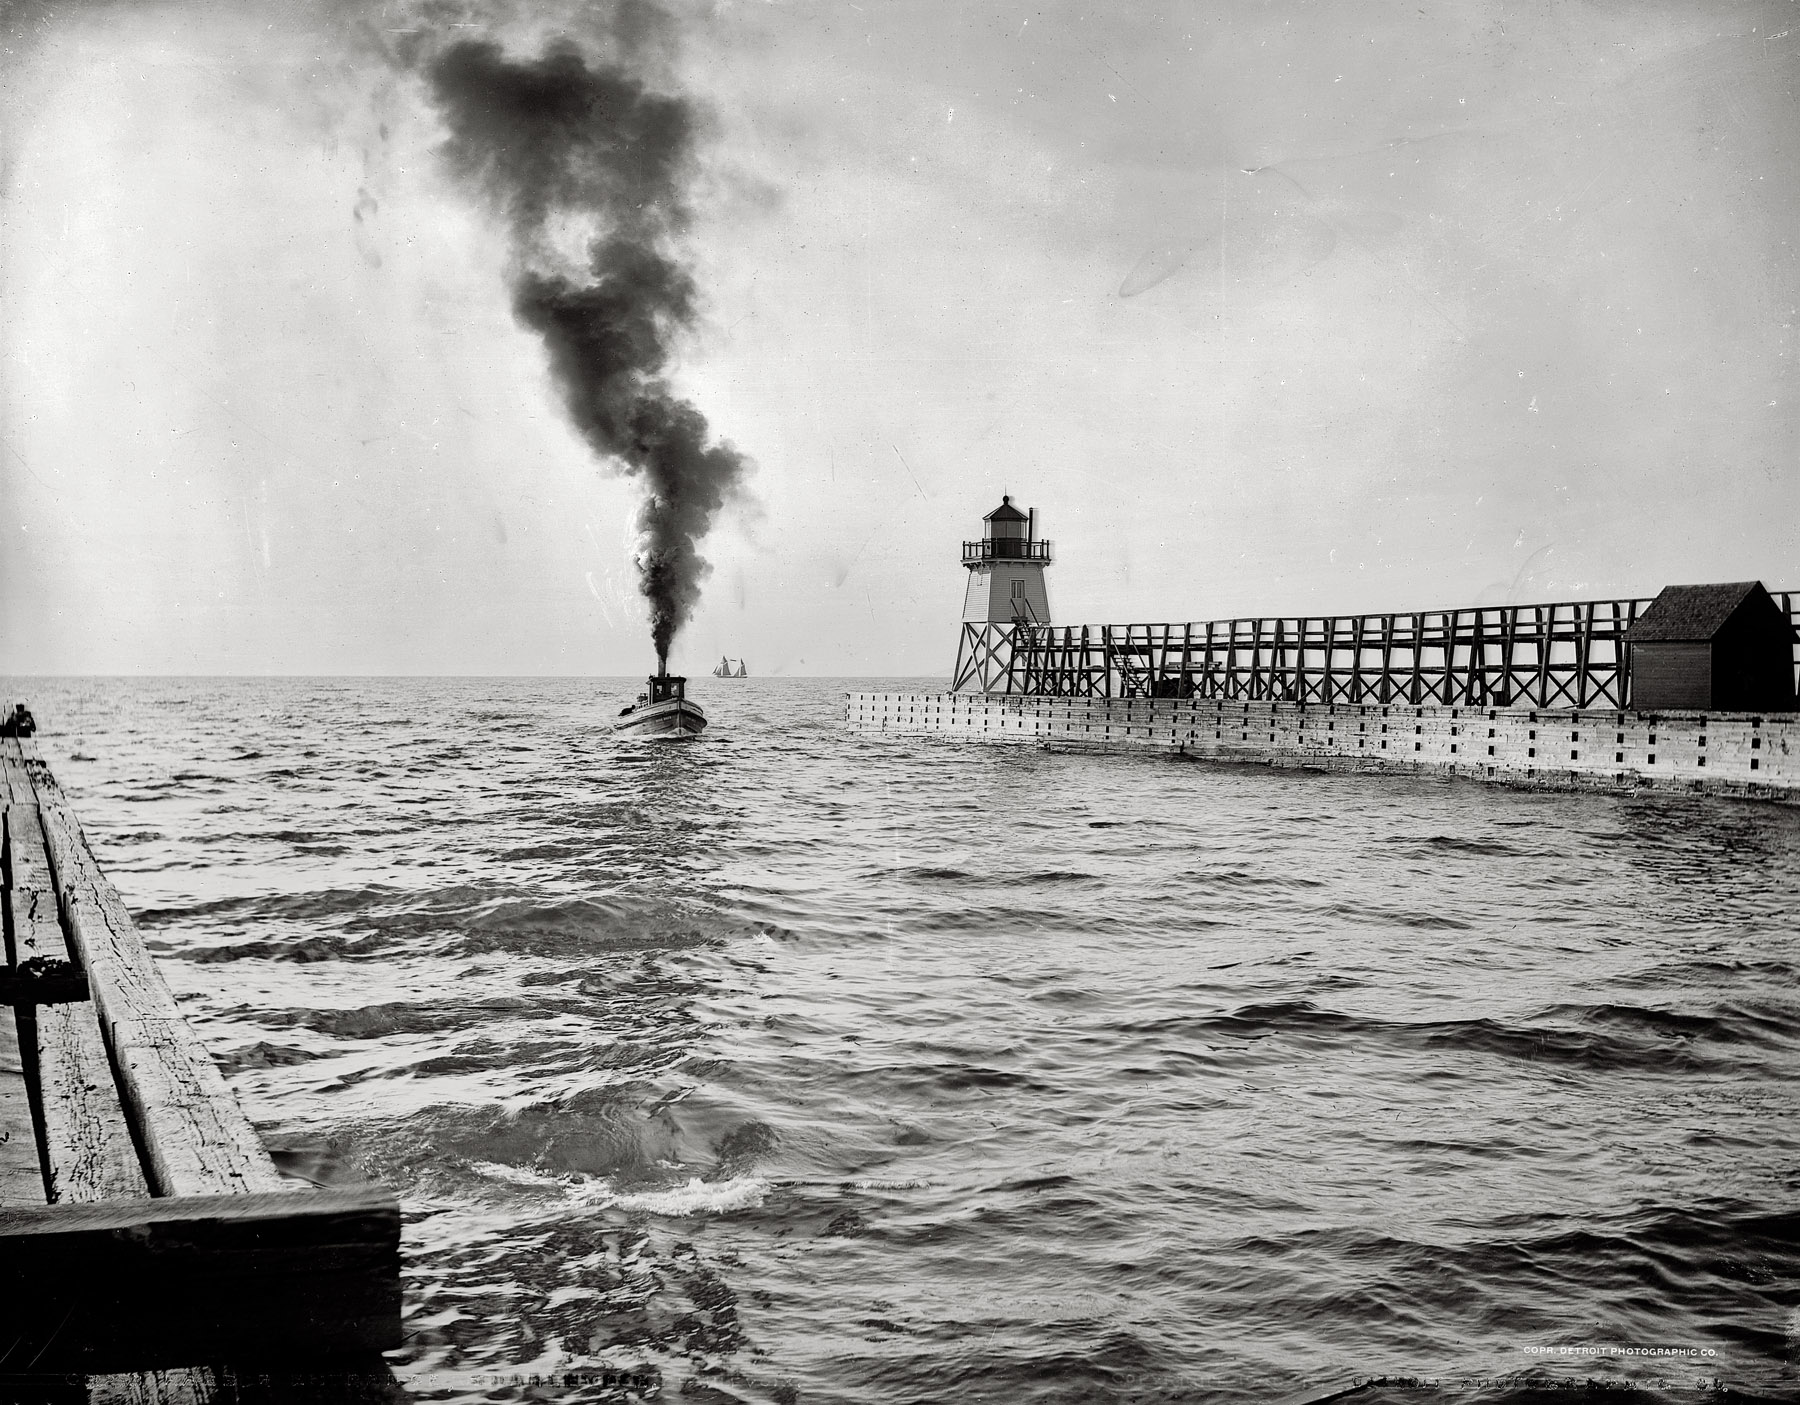 "Harbor entrance and light house, Charlevoix, Michigan," circa 1900. Detroit Publishing Company glass negative, Library of Congress. View full size.